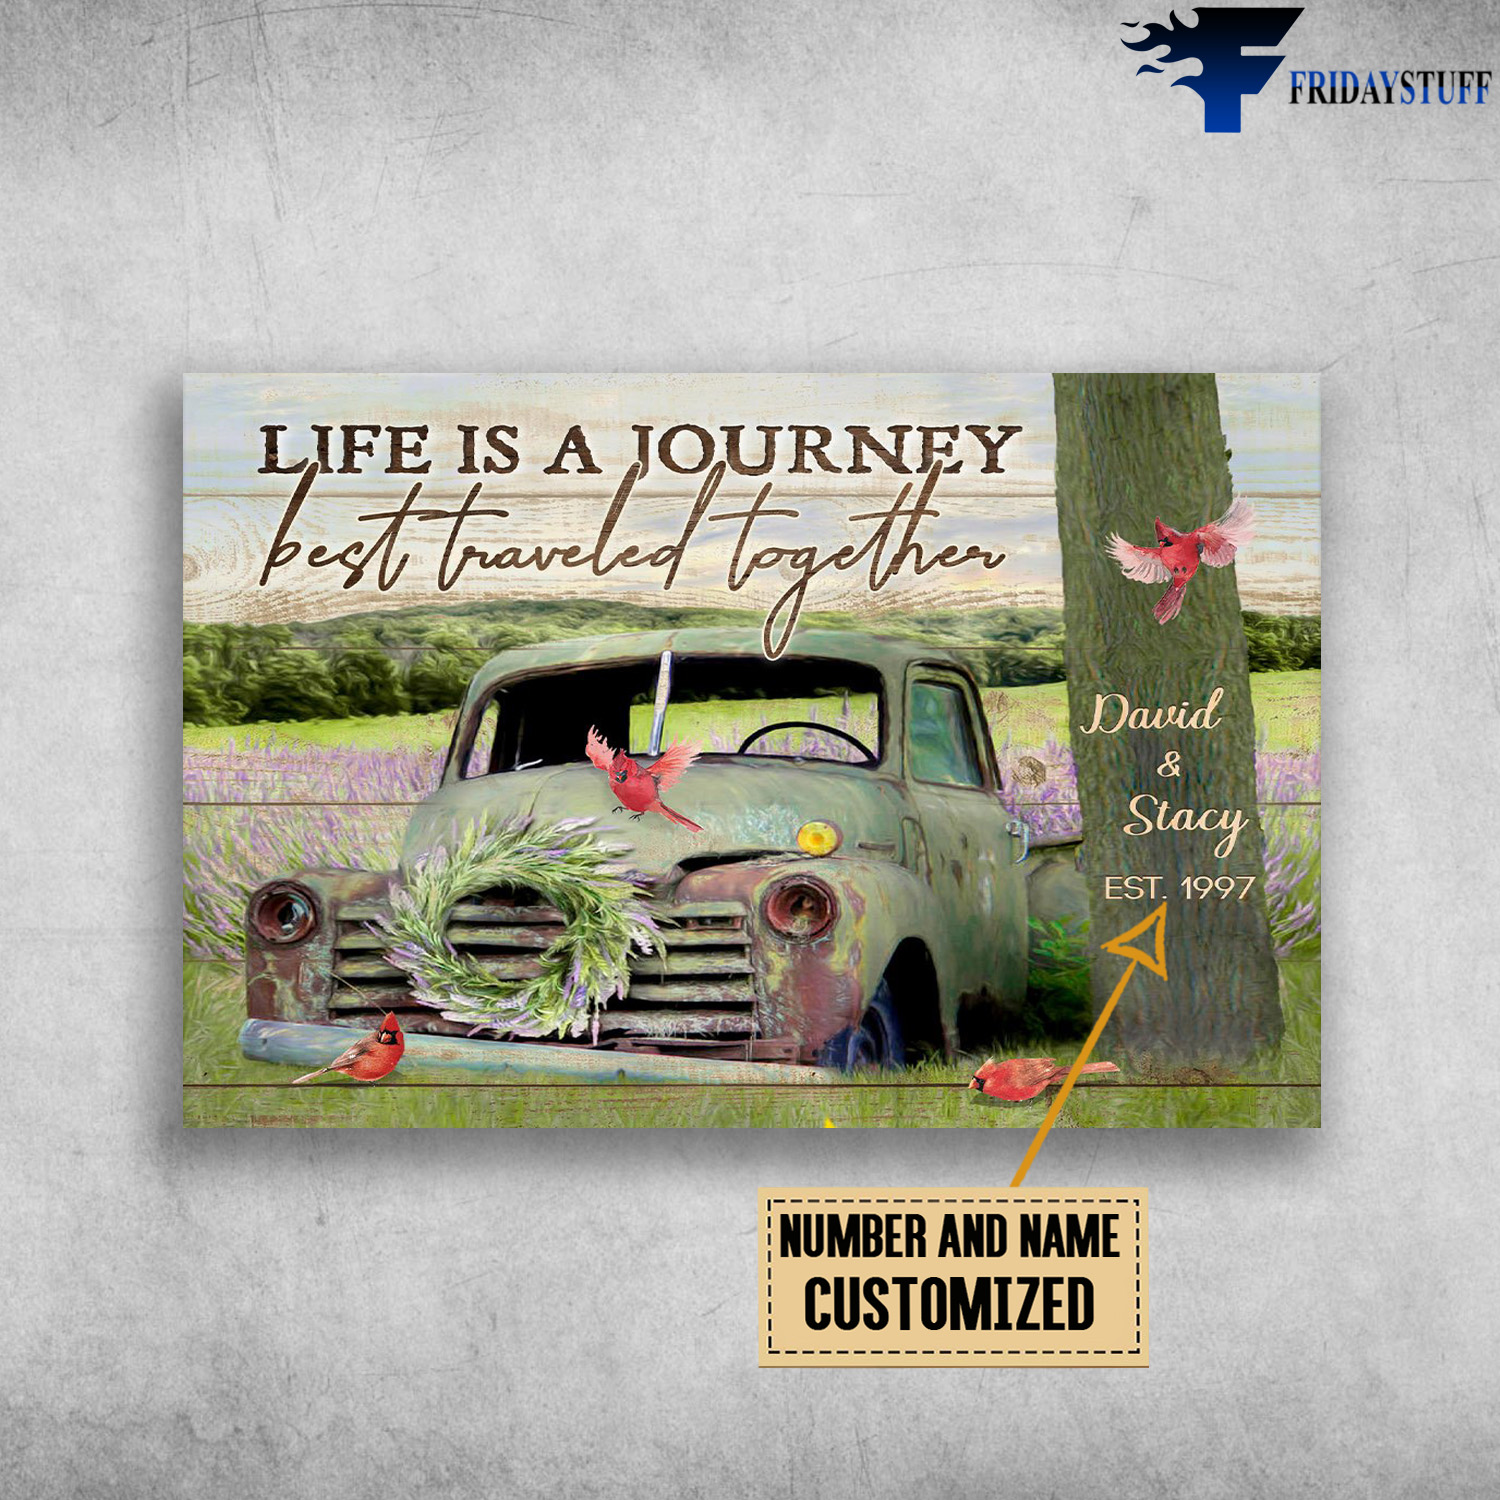 Cardinal Bird And Truck, Life Is A Journey, Best Traveled Together